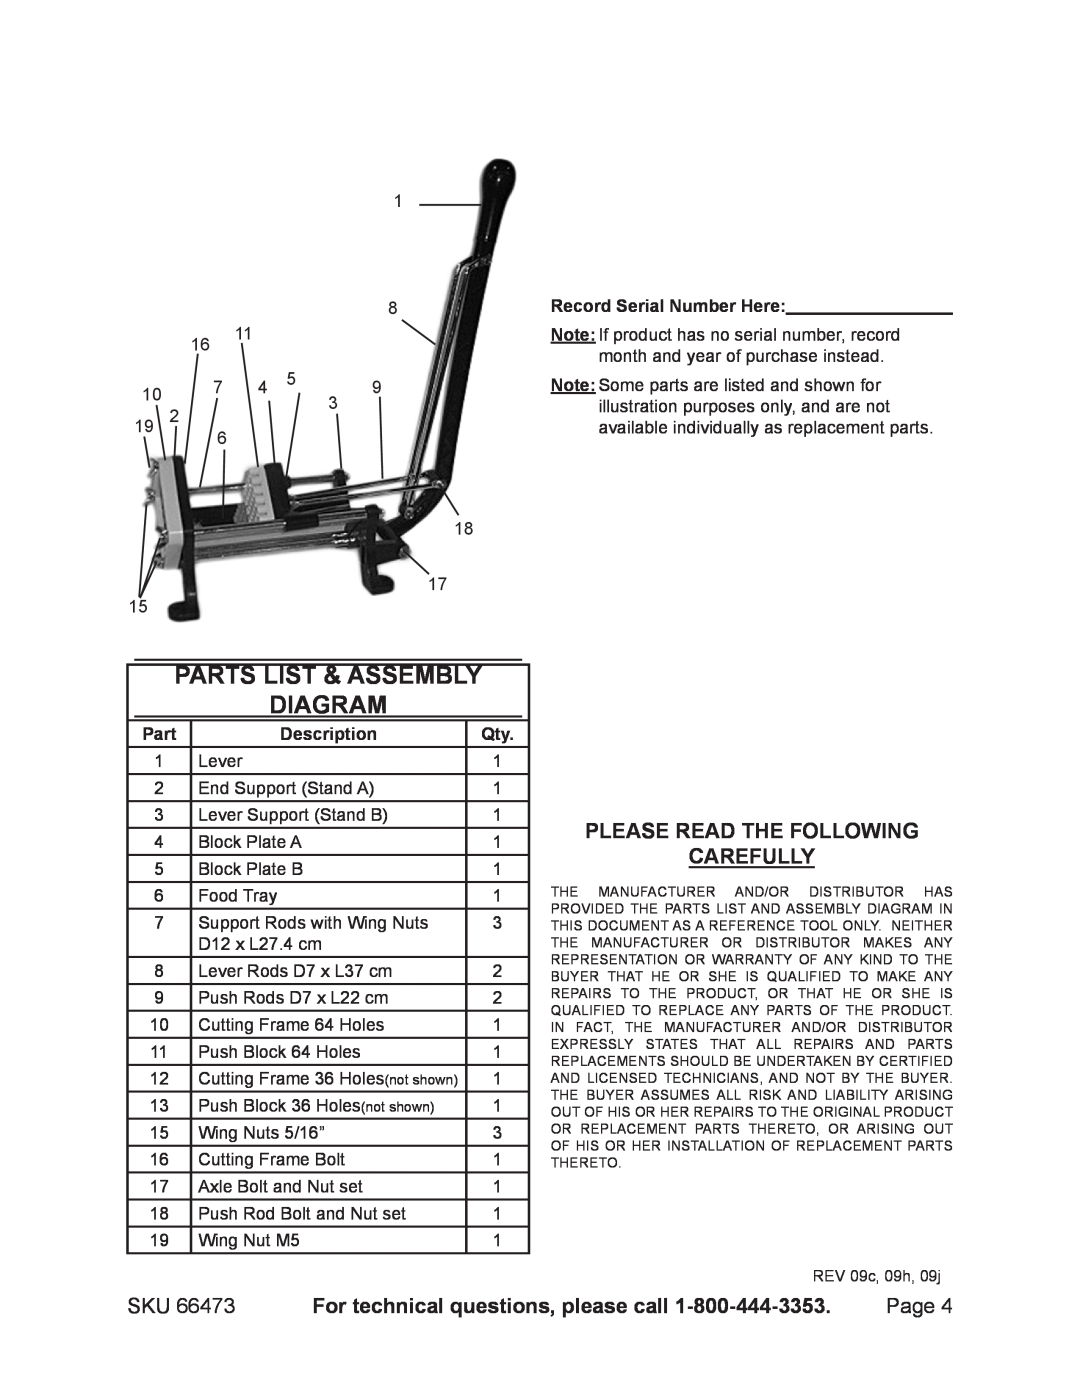 Harbor Freight Tools 66473 Parts List & assembly diagram, Please Read The Following Carefully, Record Serial Number Here 